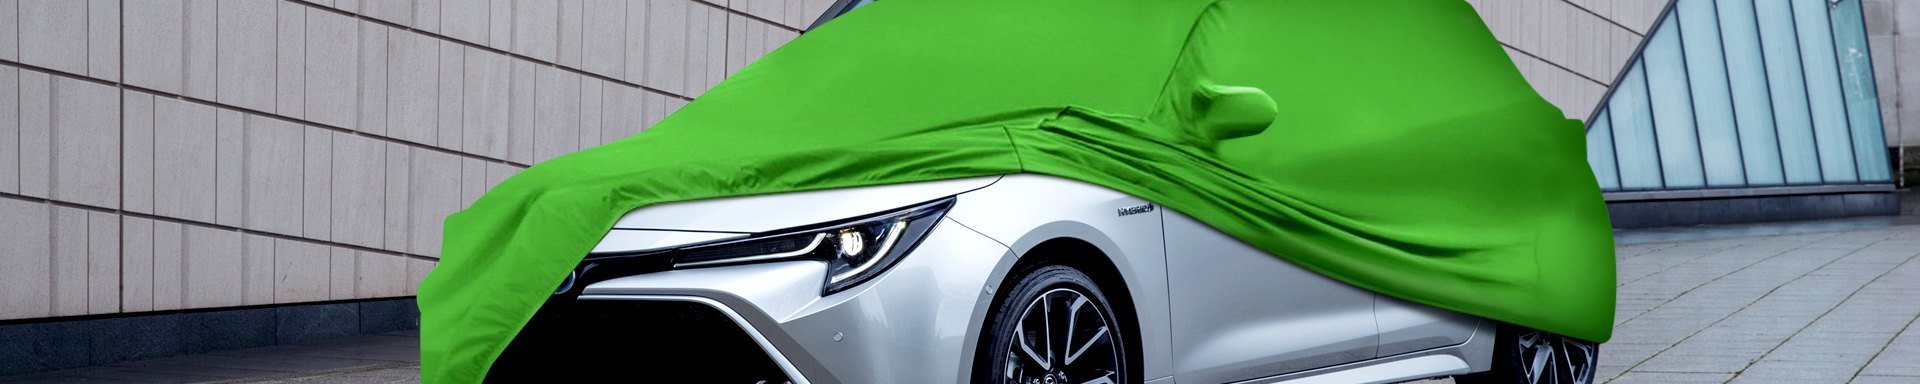 New Line Of Coverking Car Covers For 2020-2021 Toyota Corolla Is Already Here!